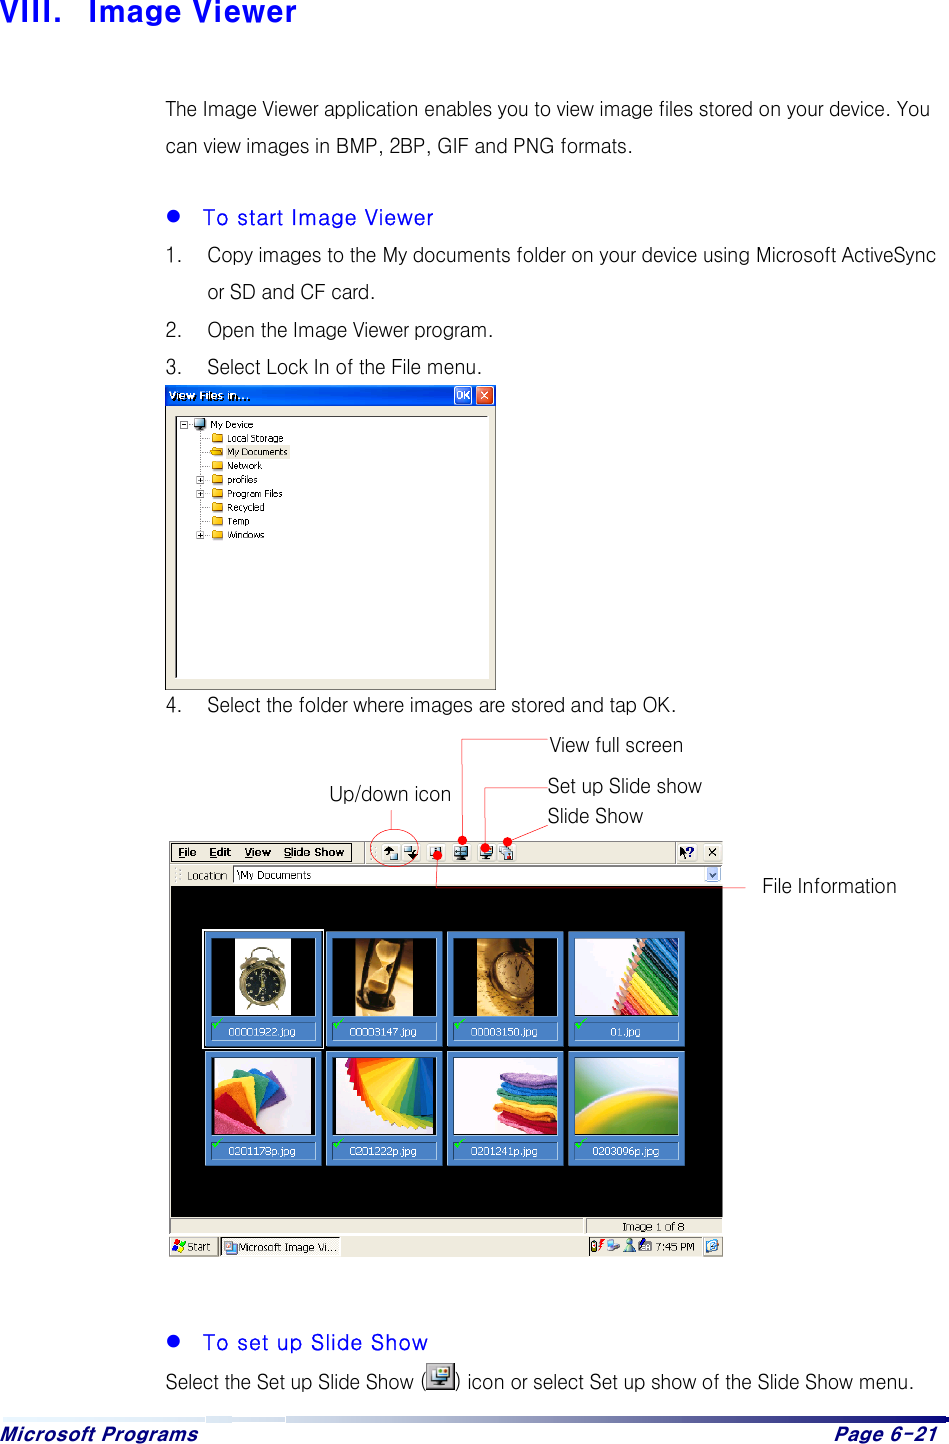 Microsoft Programs    Page 6-21   VIII.  Image Viewer  The Image Viewer application enables you to view image files stored on your device. You can view images in BMP, 2BP, GIF and PNG formats.    To start Image Viewer 1.  Copy images to the My documents folder on your device using Microsoft ActiveSync or SD and CF card. 2.  Open the Image Viewer program. 3.  Select Lock In of the File menu.         4.  Select the folder where images are stored and tap OK.                  To set up Slide Show Select the Set up Slide Show ( ) icon or select Set up show of the Slide Show menu. Slide Show View full screen File Information Set up Slide show Up/down icon